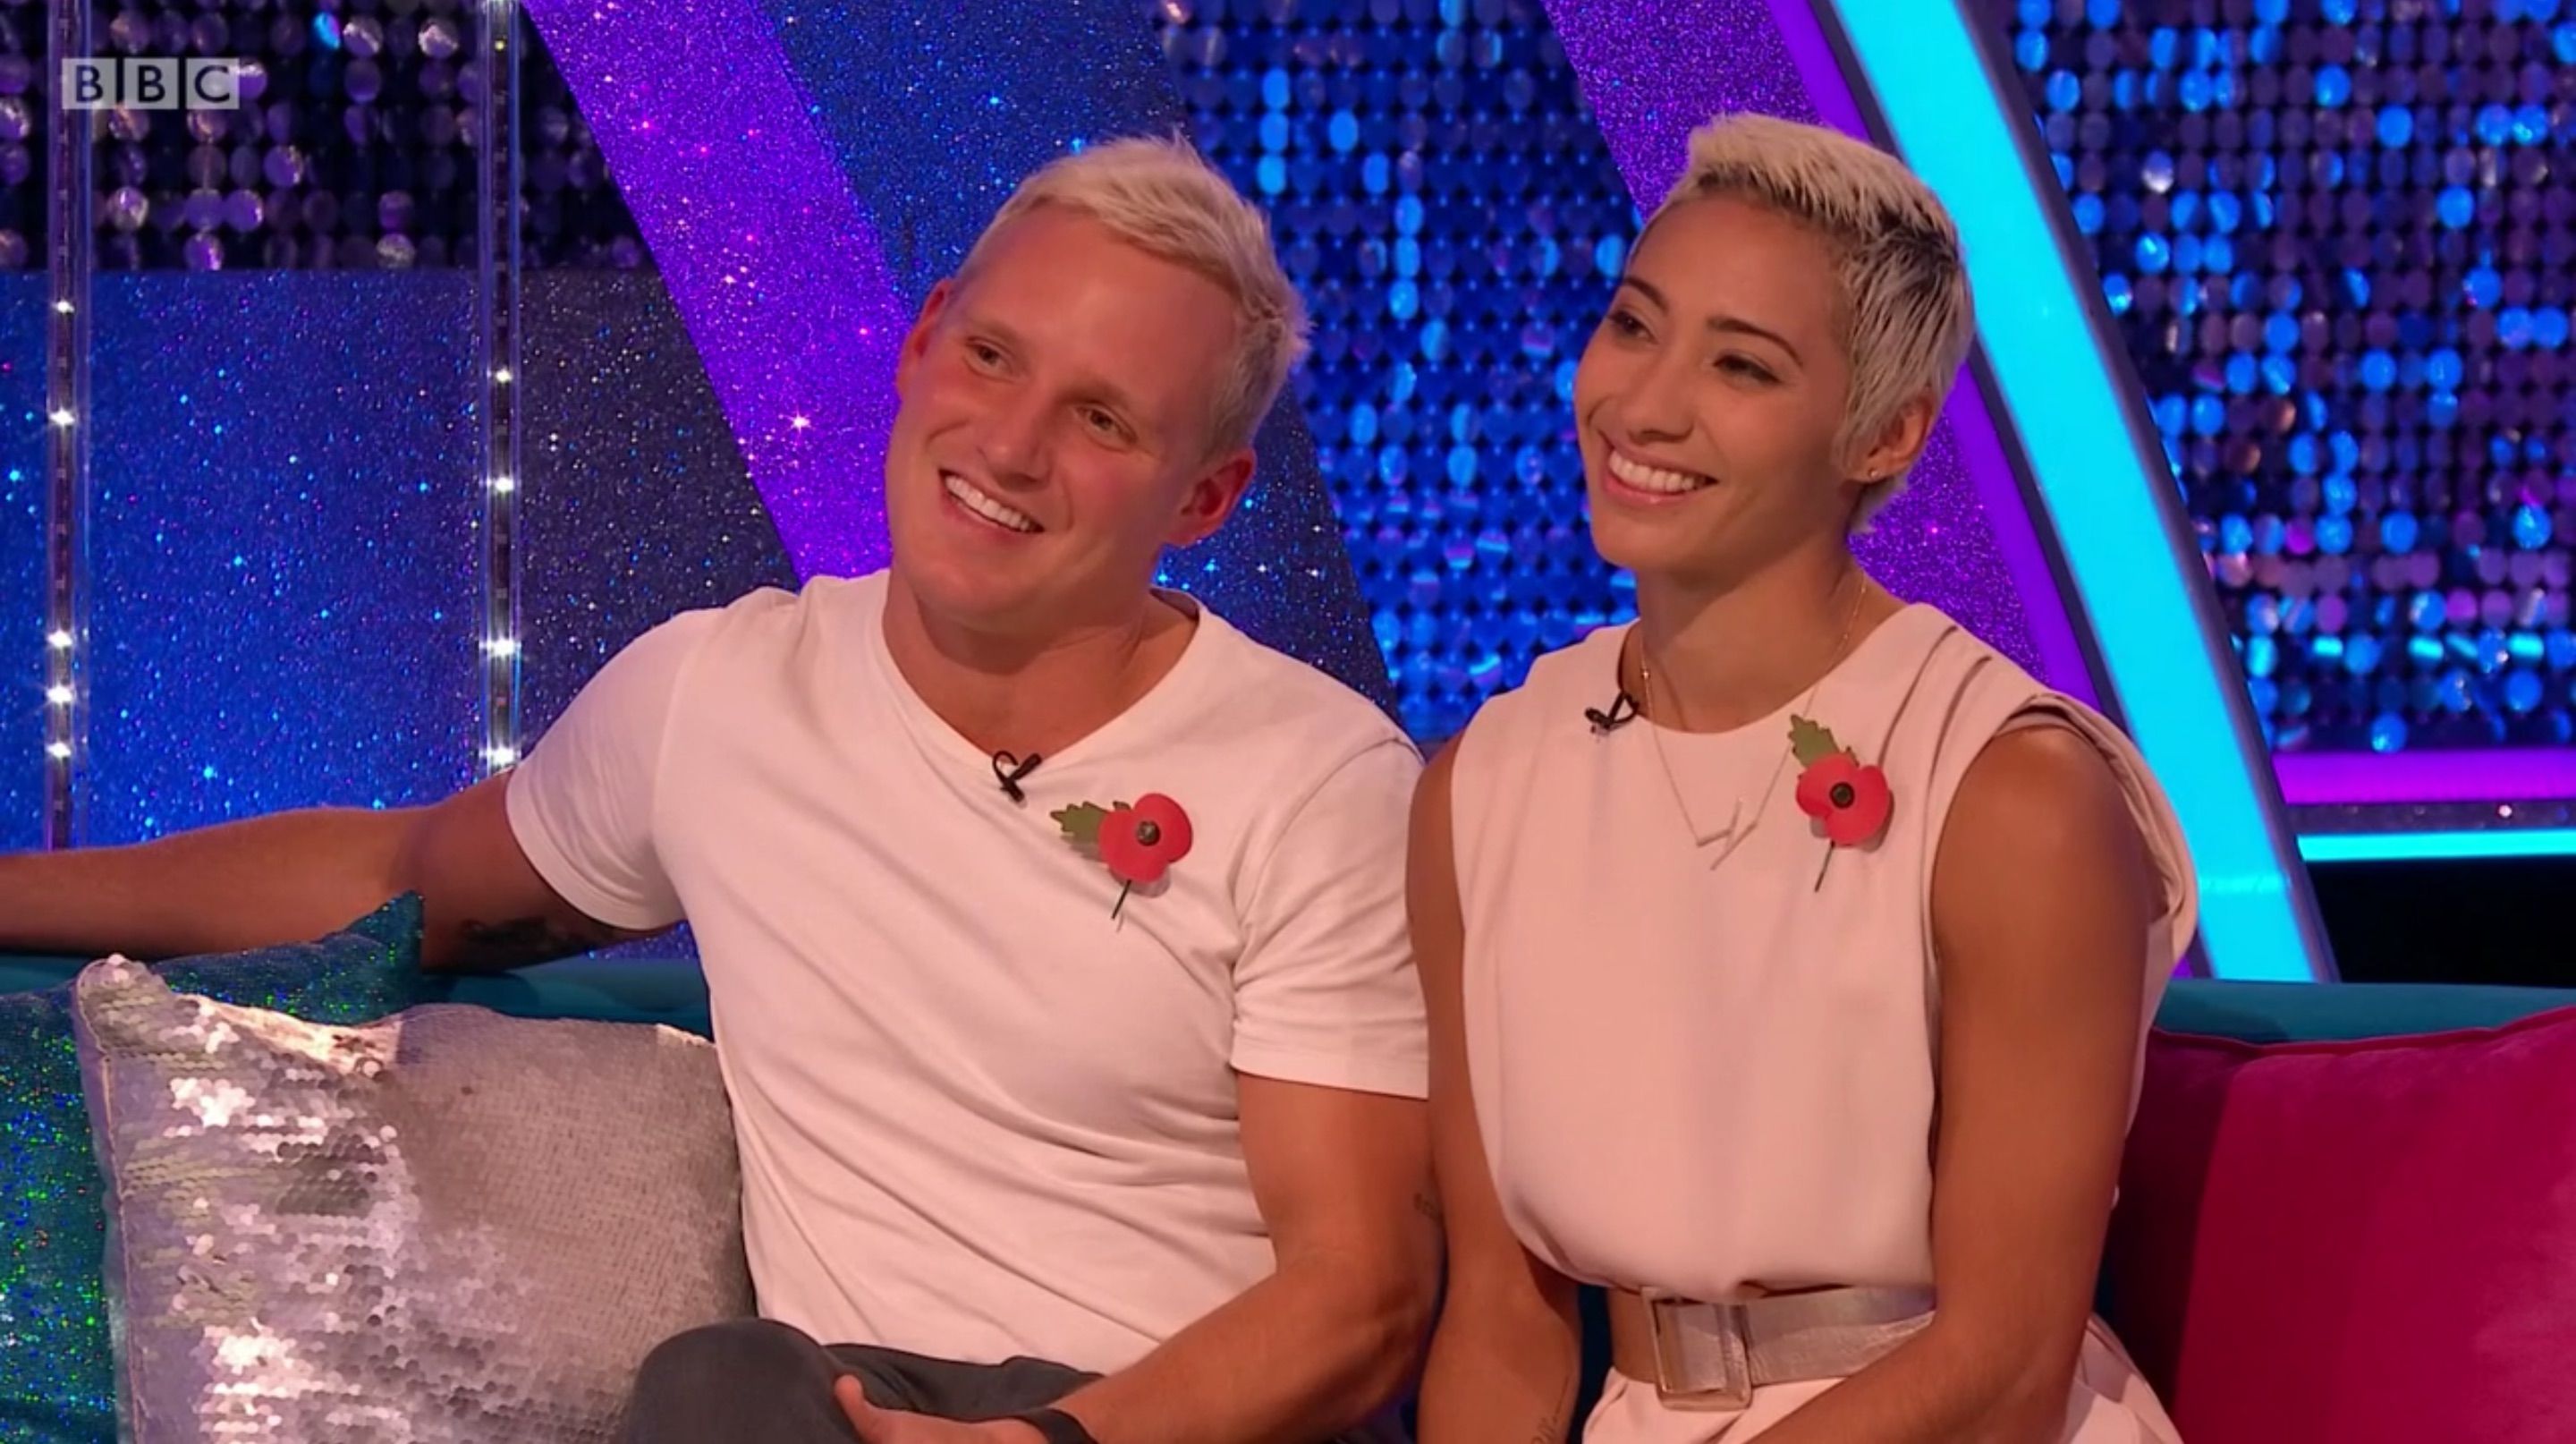 Jamie Laing mortified by leaked explicit images doing the 